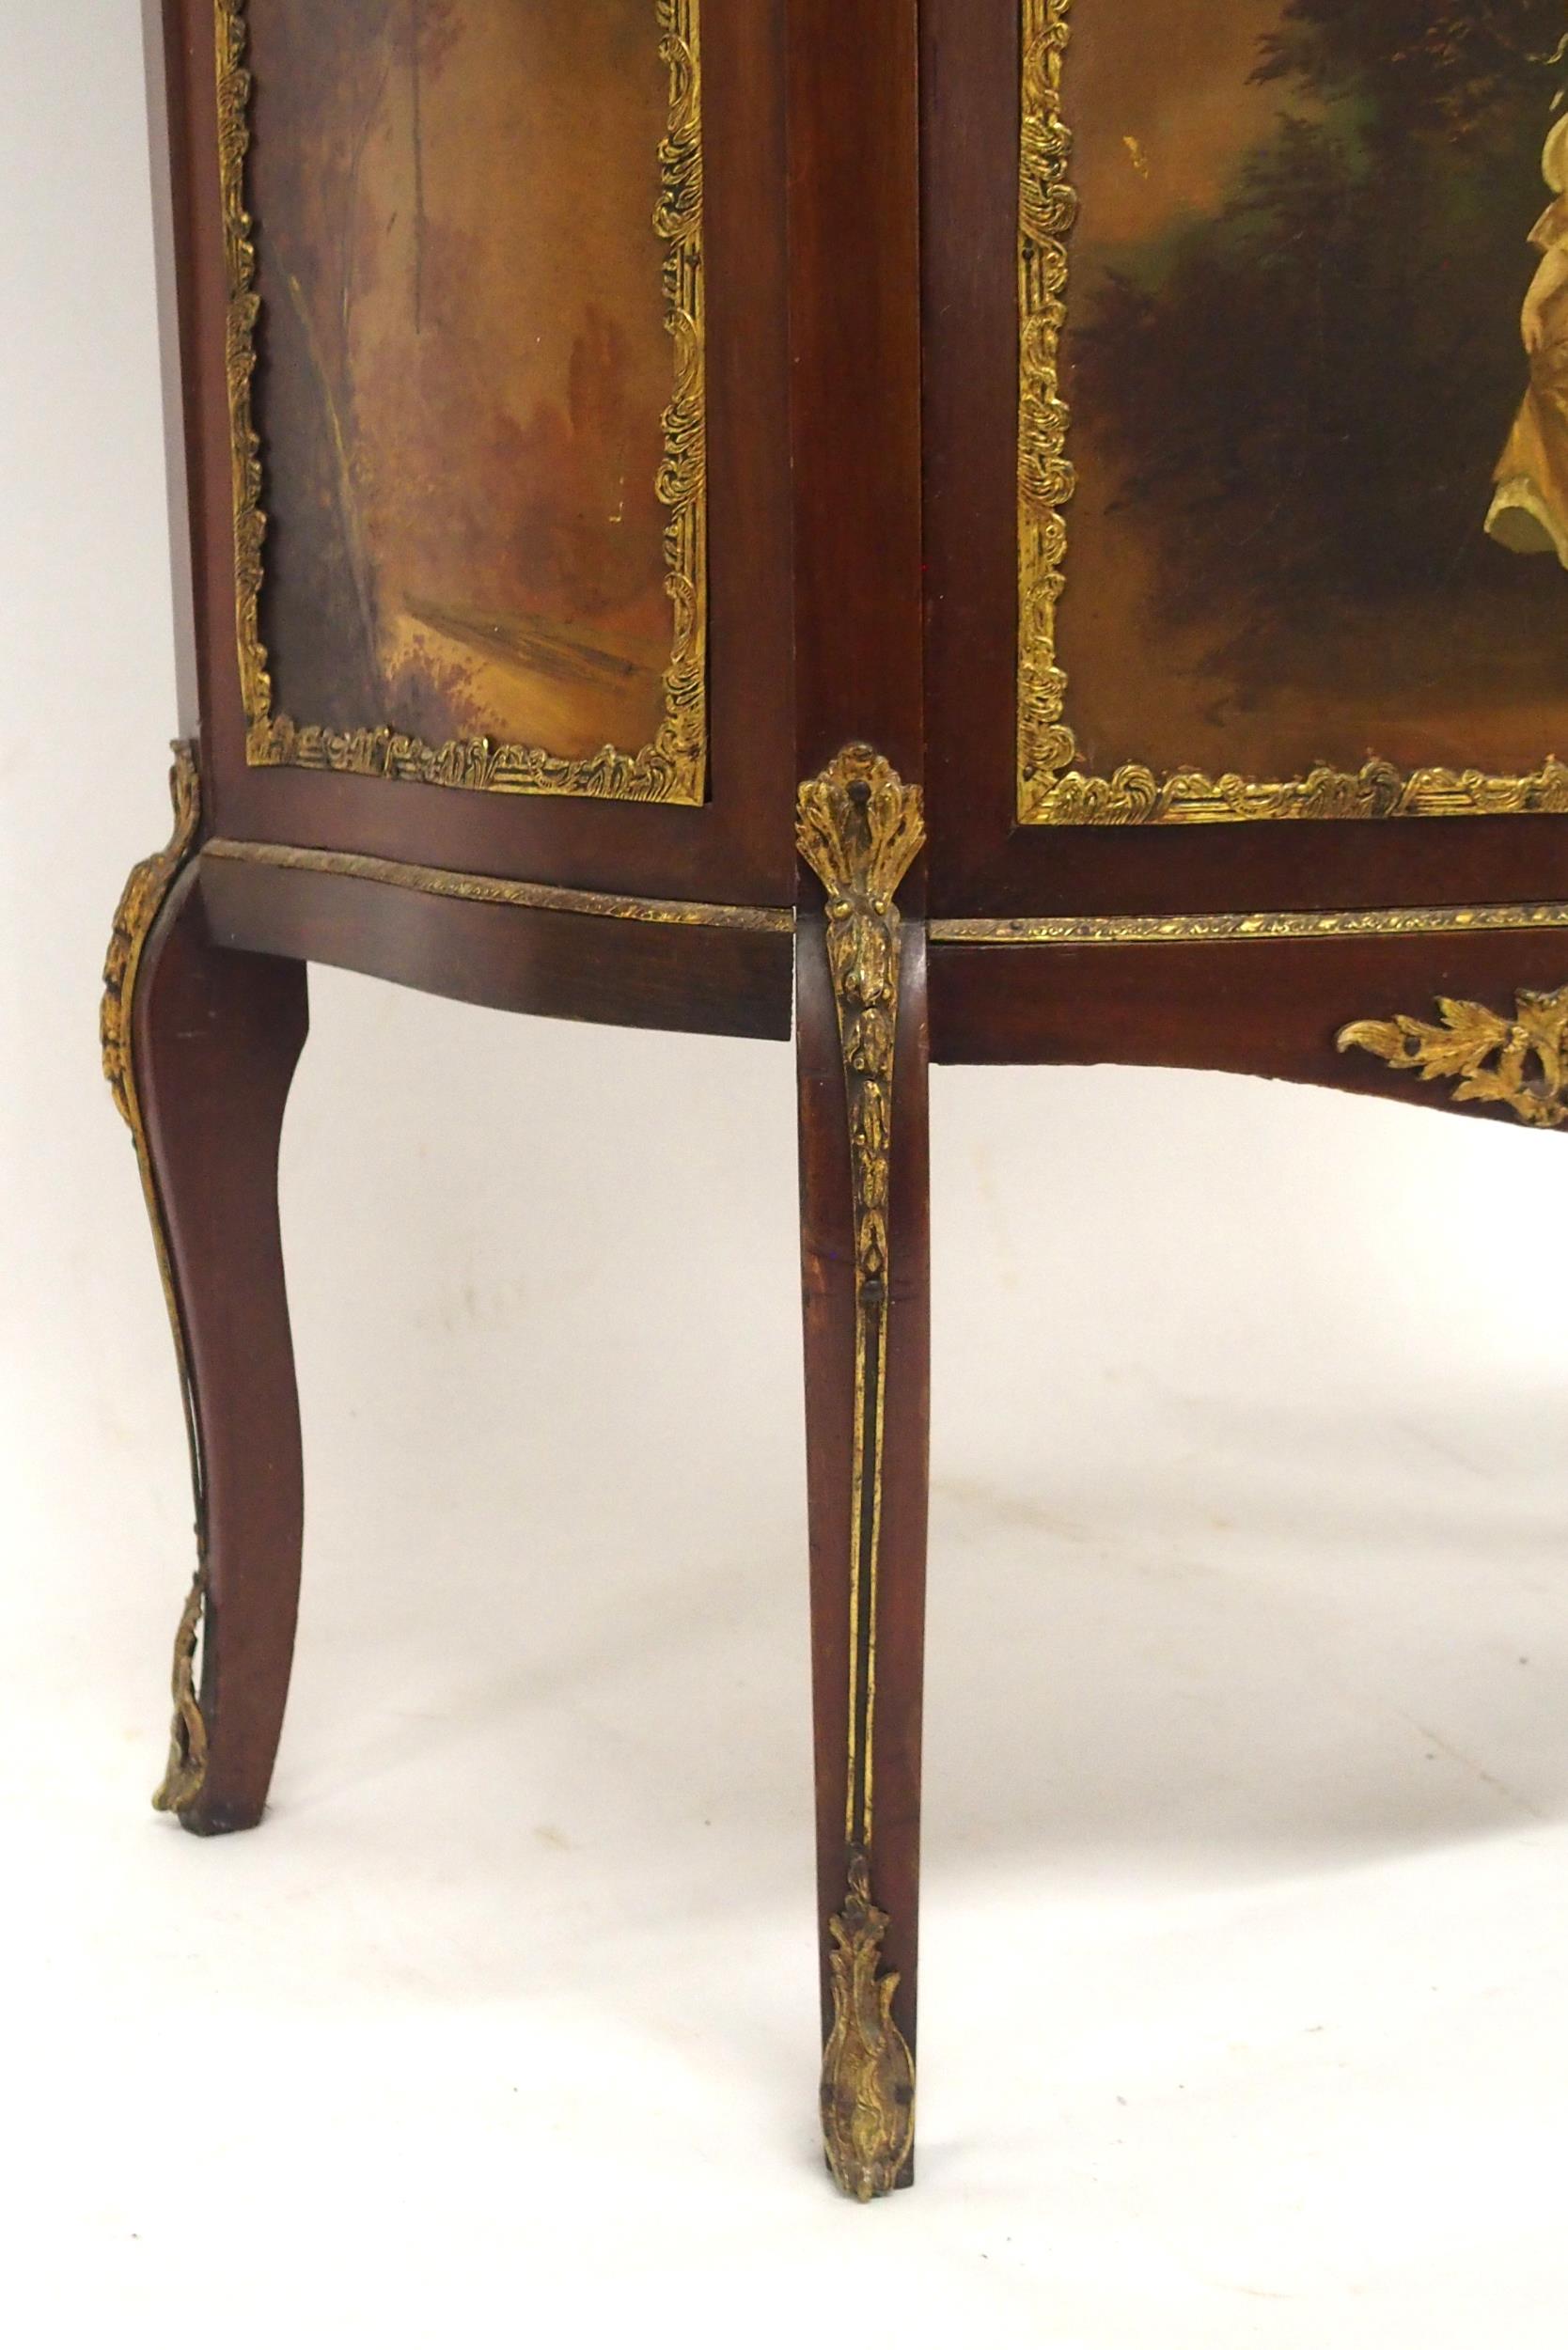 AN EARLY 20TH CENTURY LOUIS XV STYLE BRASS ORMOLU MOUNTED VITRINE DISPLAY CABINET  with galleried - Image 3 of 10